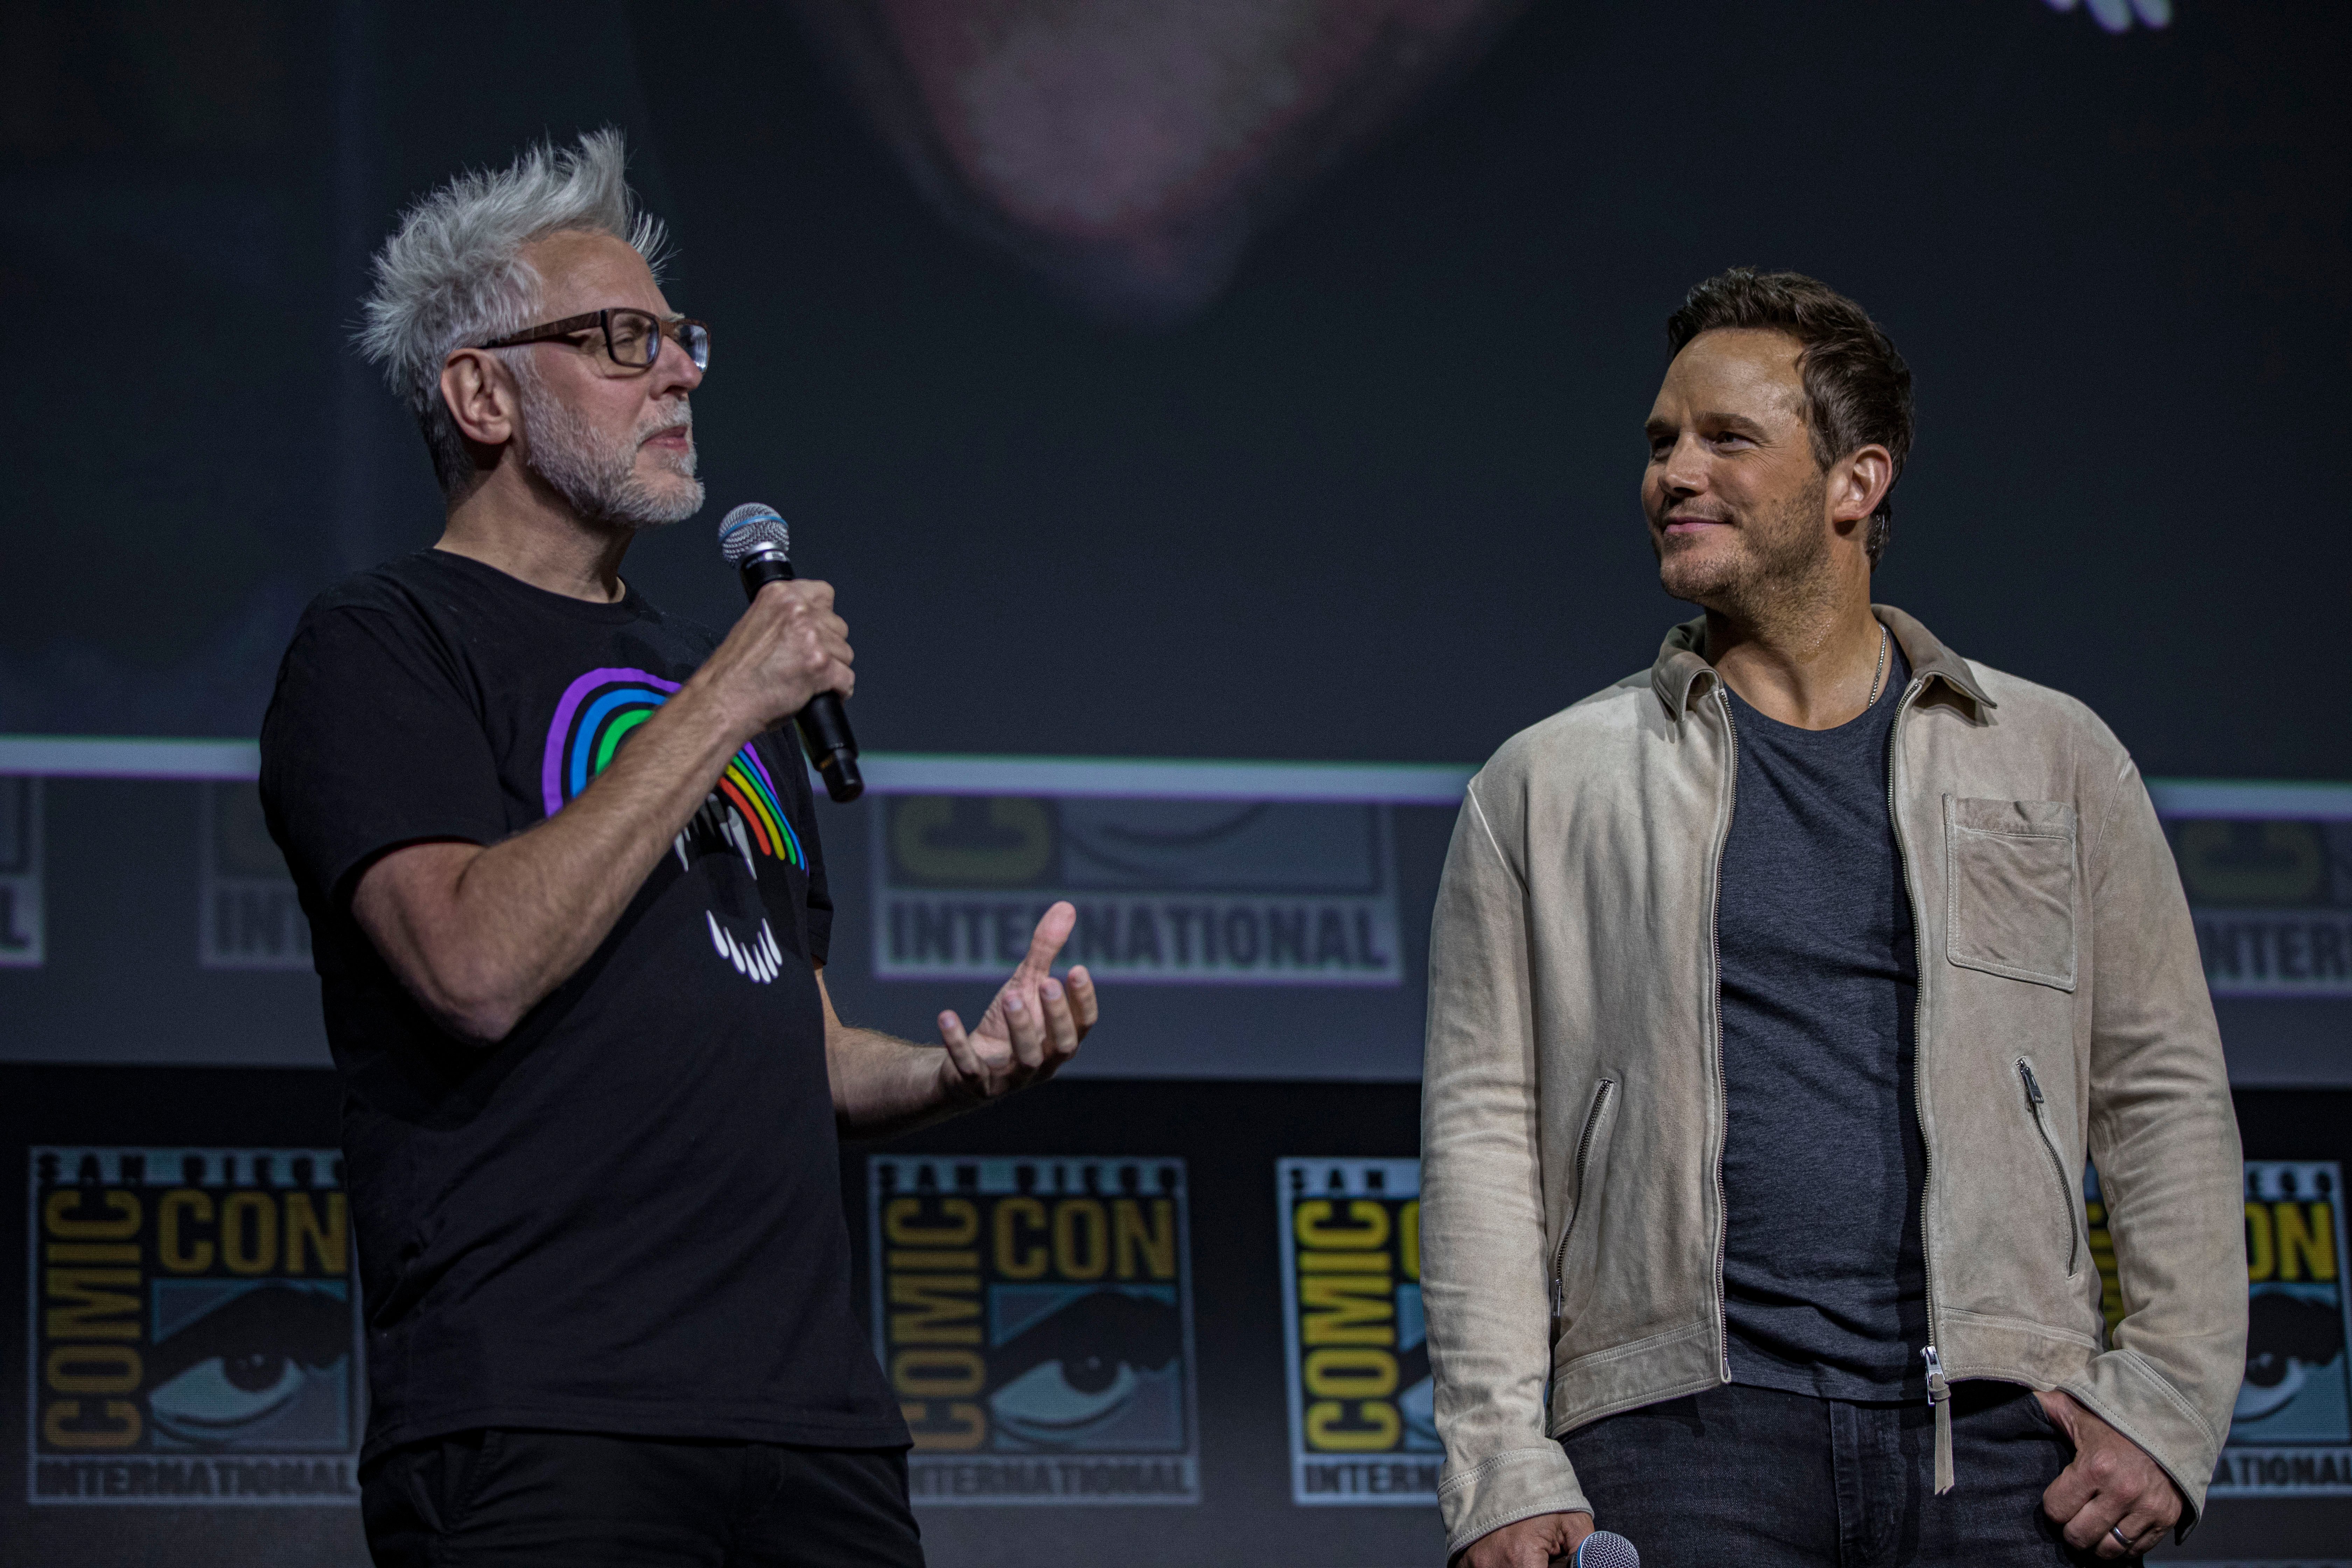 James Gunn and Chris Pratt, who directed and starred in 'Guardians of the Galaxy 3,' respectively,